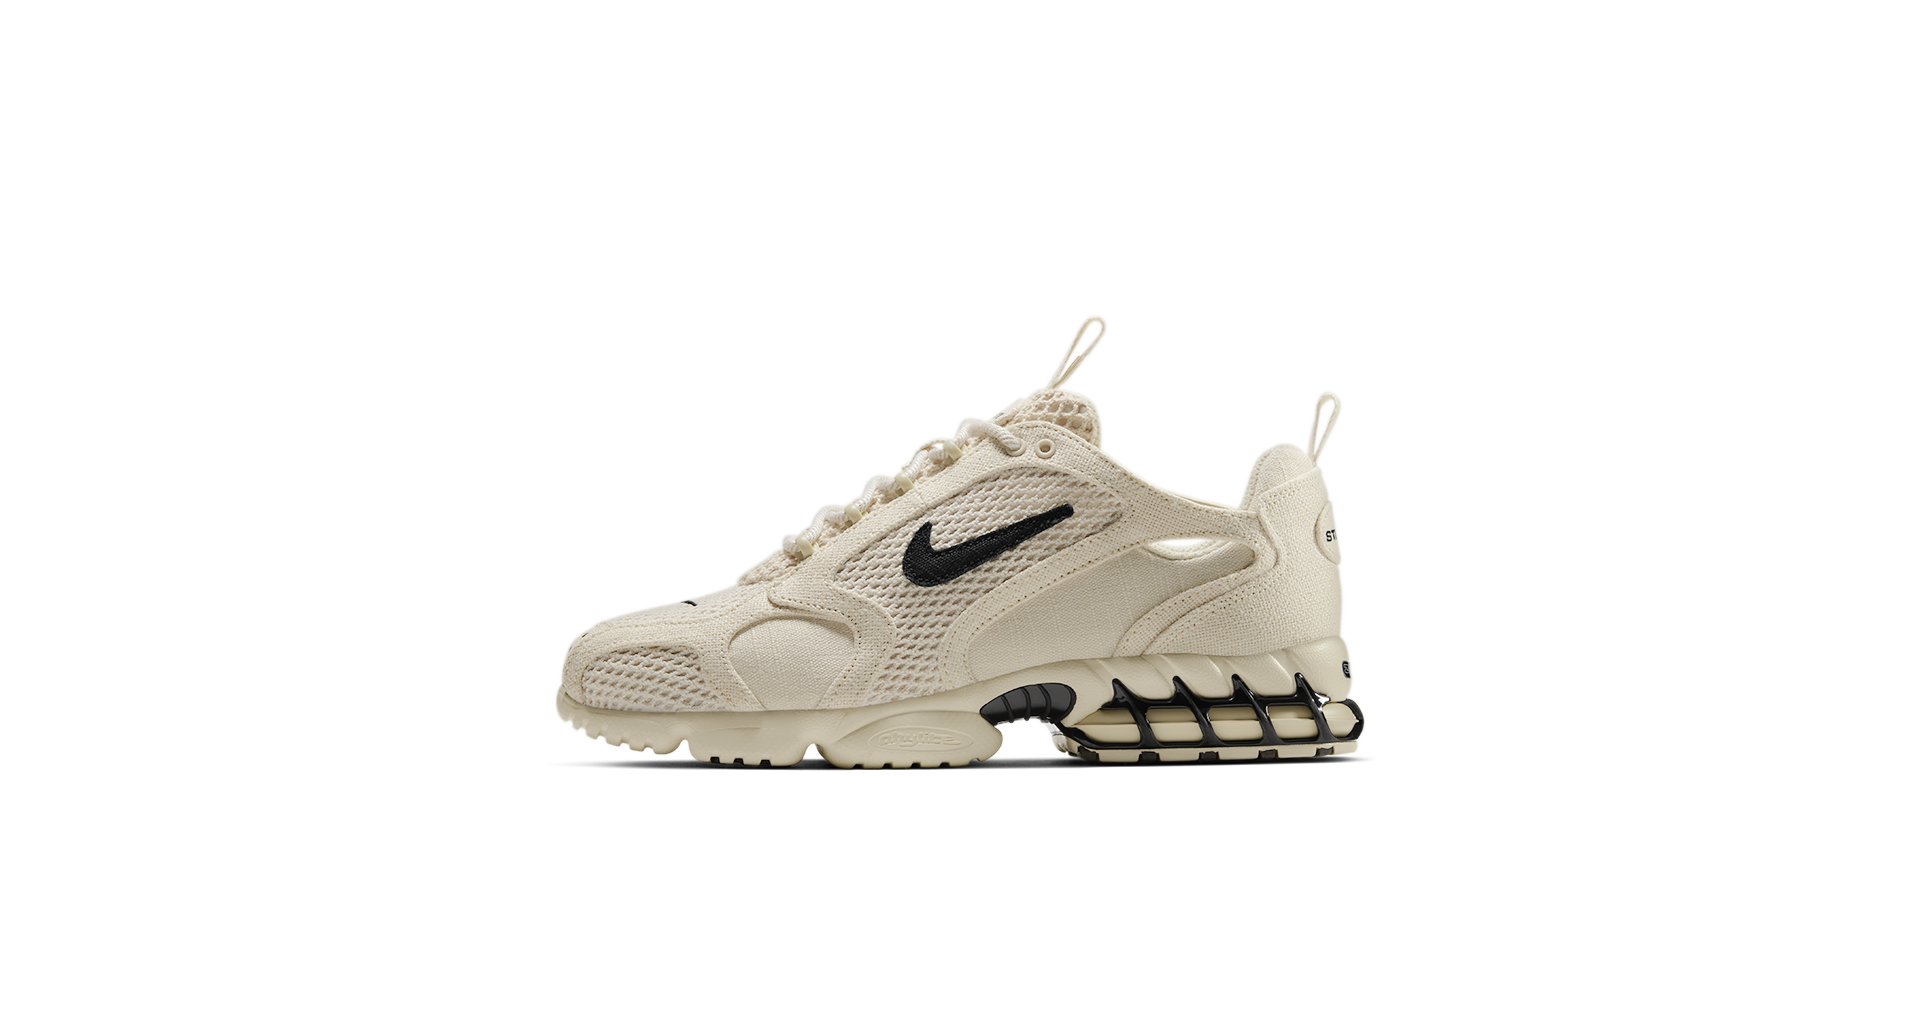 Nike x StÃ¼ssy Air Zoom Spiridon Cage 2 'Fossil' Release Date. Nike SNKRS PH